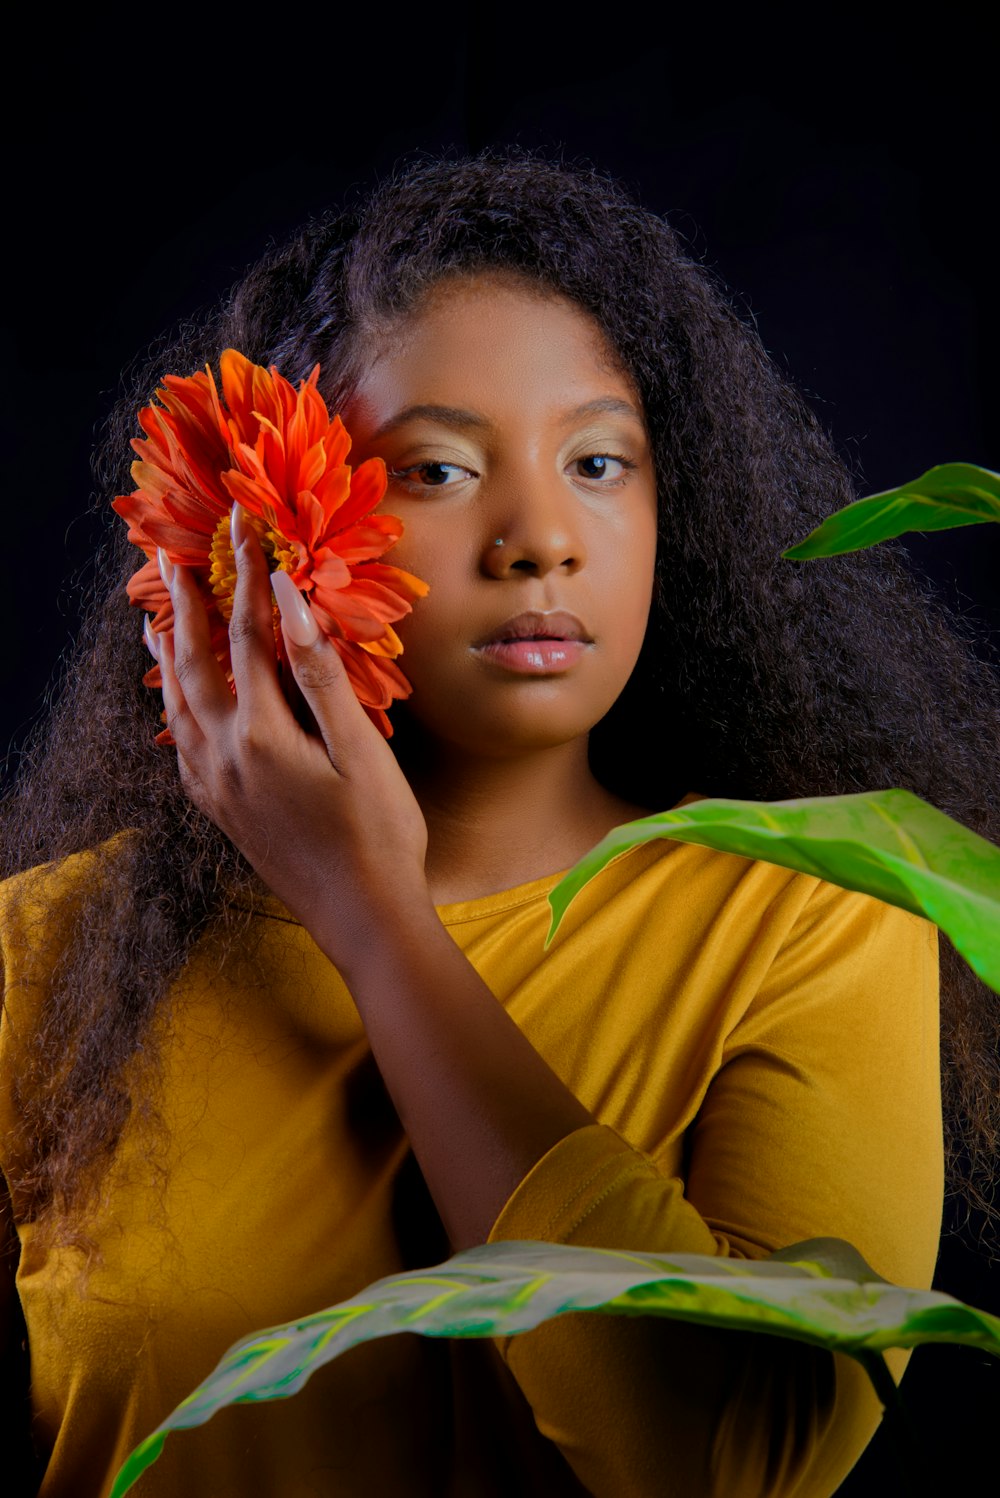 girl in yellow shirt holding red flower